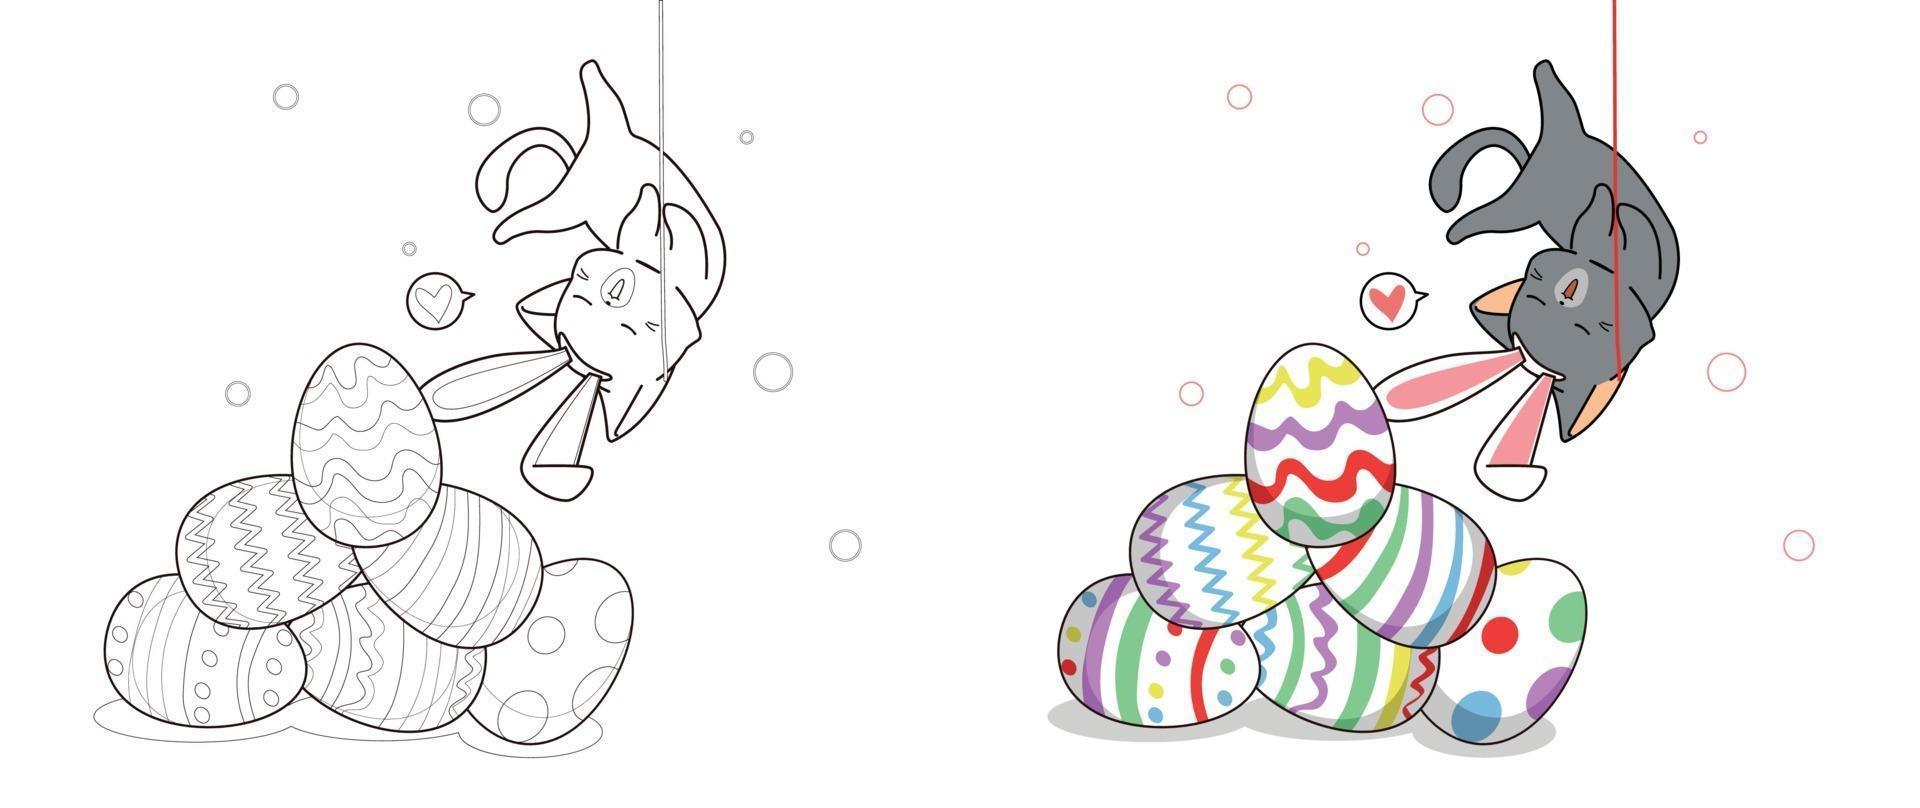 Bunny cat is falling on eggs, coloring page for kids vector